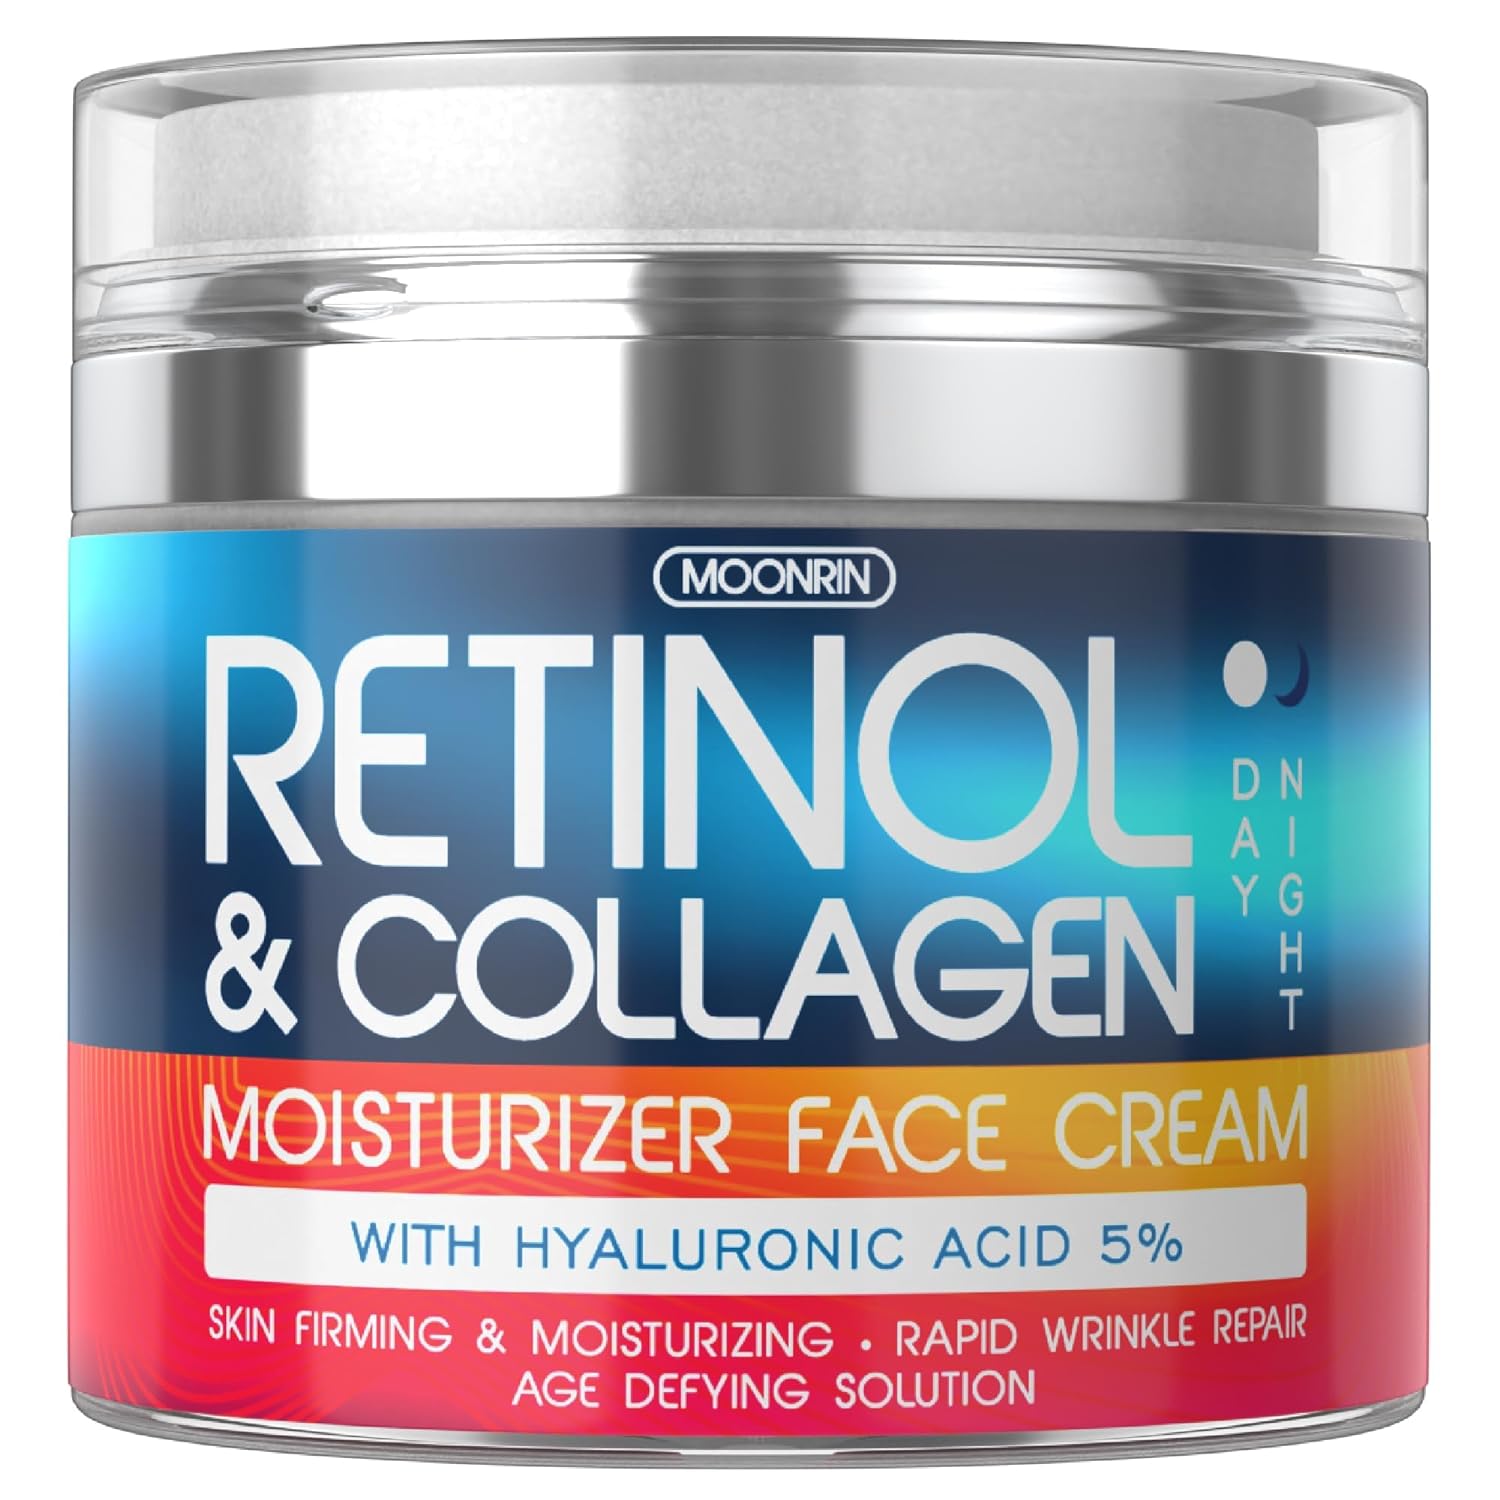 Wholesale prices with free shipping all over United States Retinol Cream for Face - Collagen and Retinol Moisturizer with Hyaluronic Acid, Day-Night Anti-Aging Moisturizer for Women, Men, Collagen Cream for Face Reduces Wrinkles, Dryness, 1.85 Oz - Steven Deals